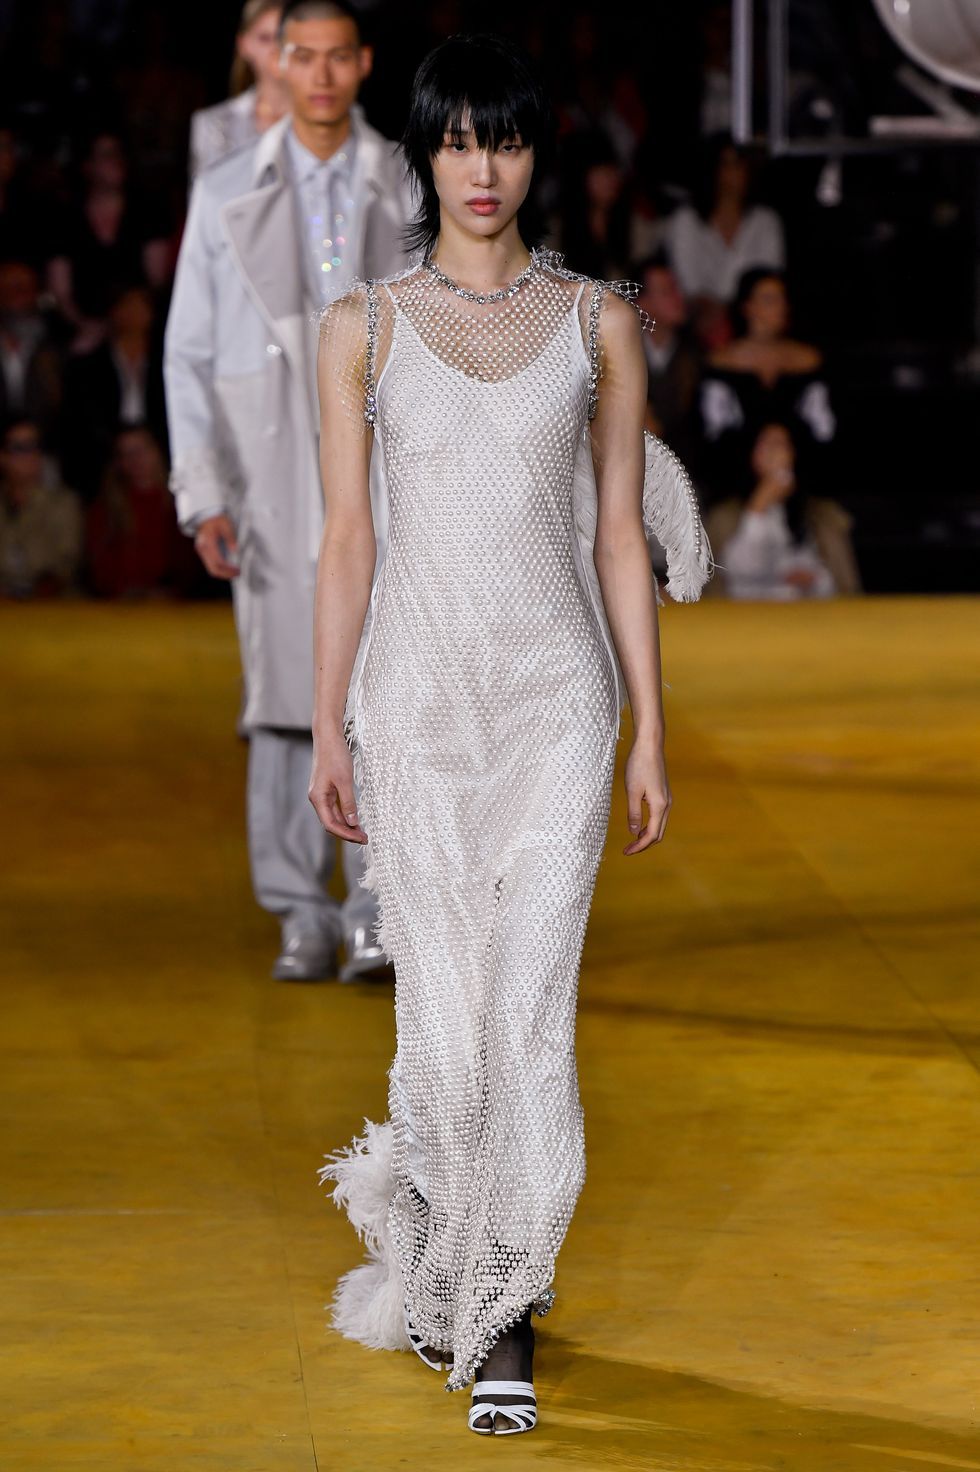 Ready-to-Wear Bridal Gowns Took Over the Spring 2020 Runways